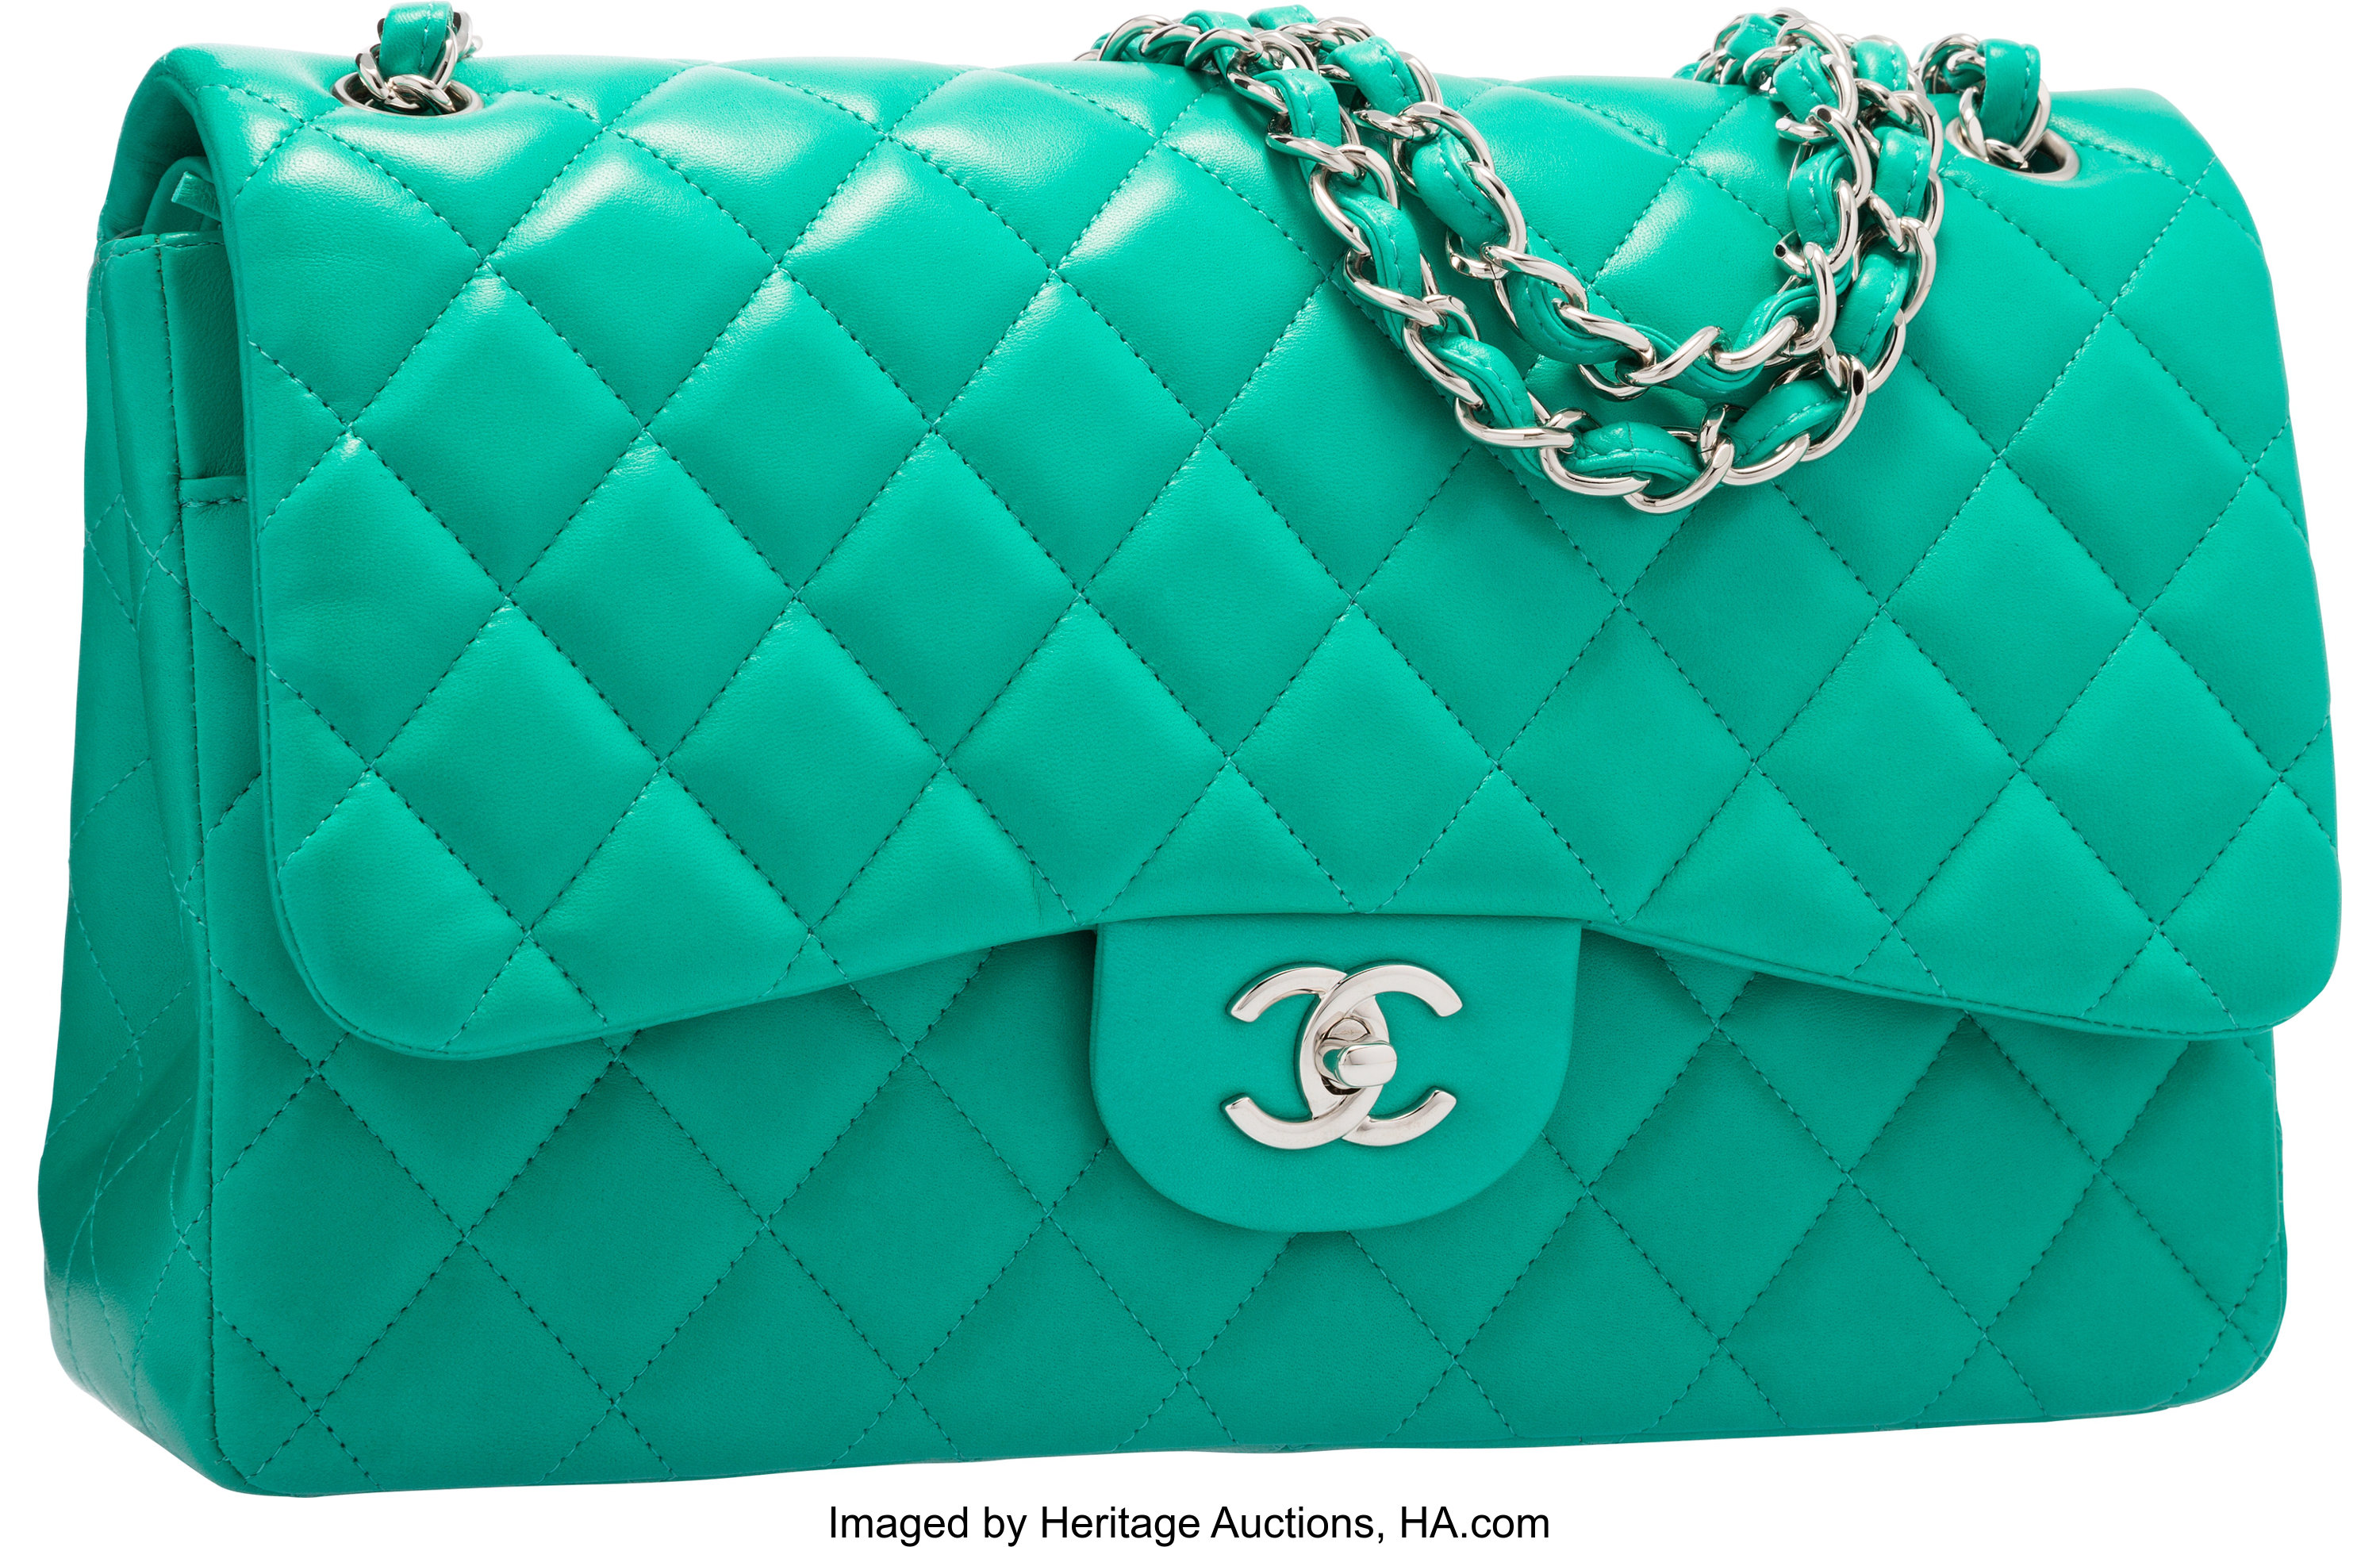 Chanel Green Quilted Lambskin Leather Jumbo Double Flap Bag with